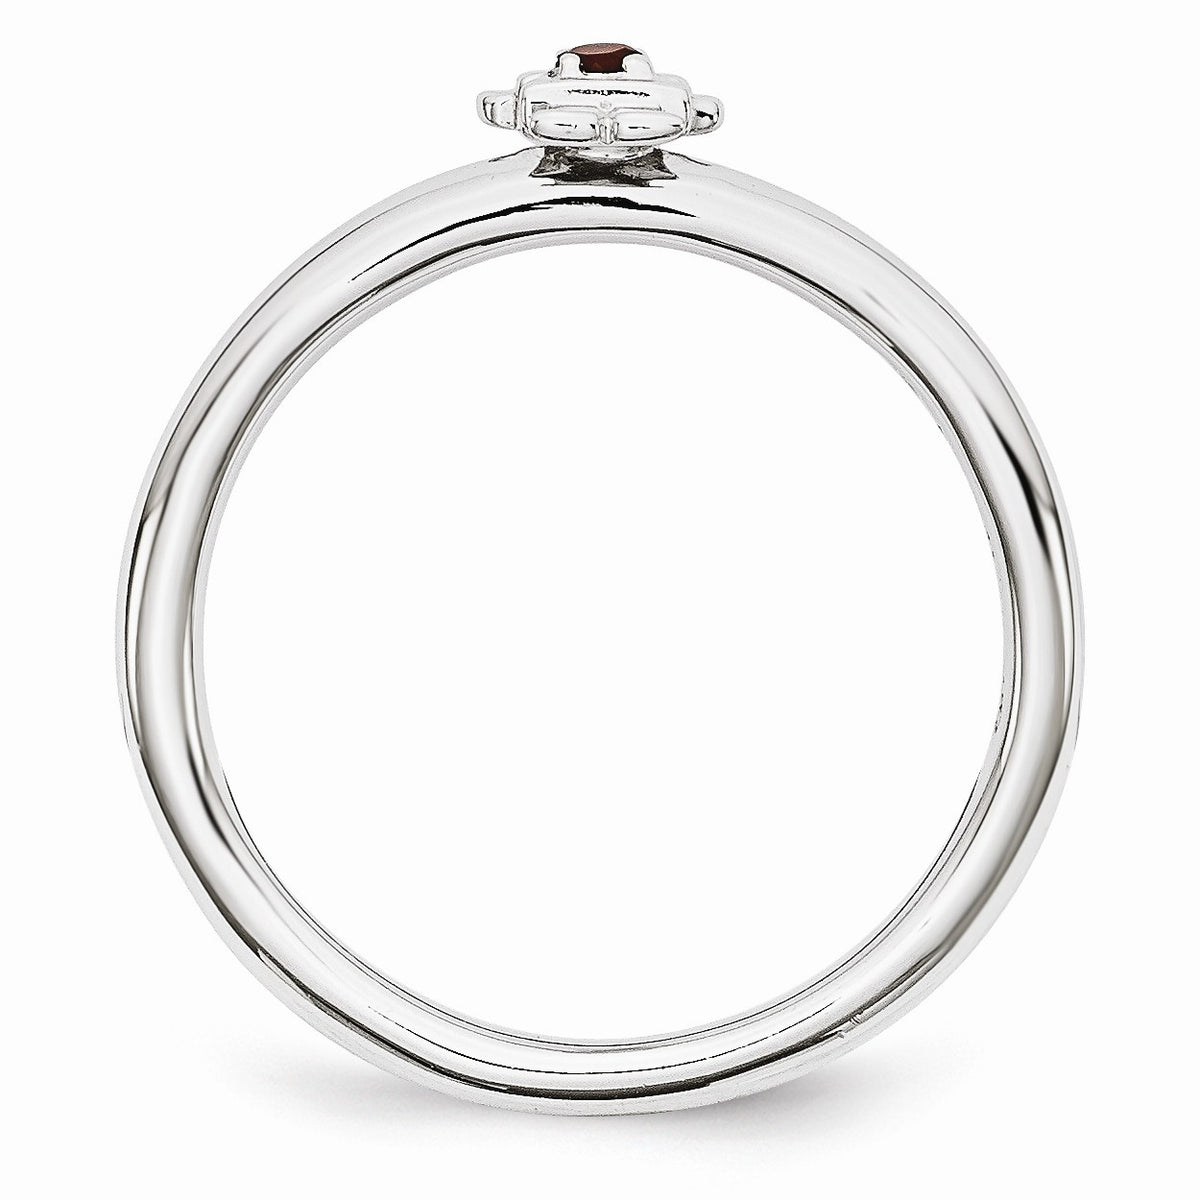 Alternate view of the Rhodium Plated Sterling Silver Stackable Garnet 7mm Girl Ring by The Black Bow Jewelry Co.